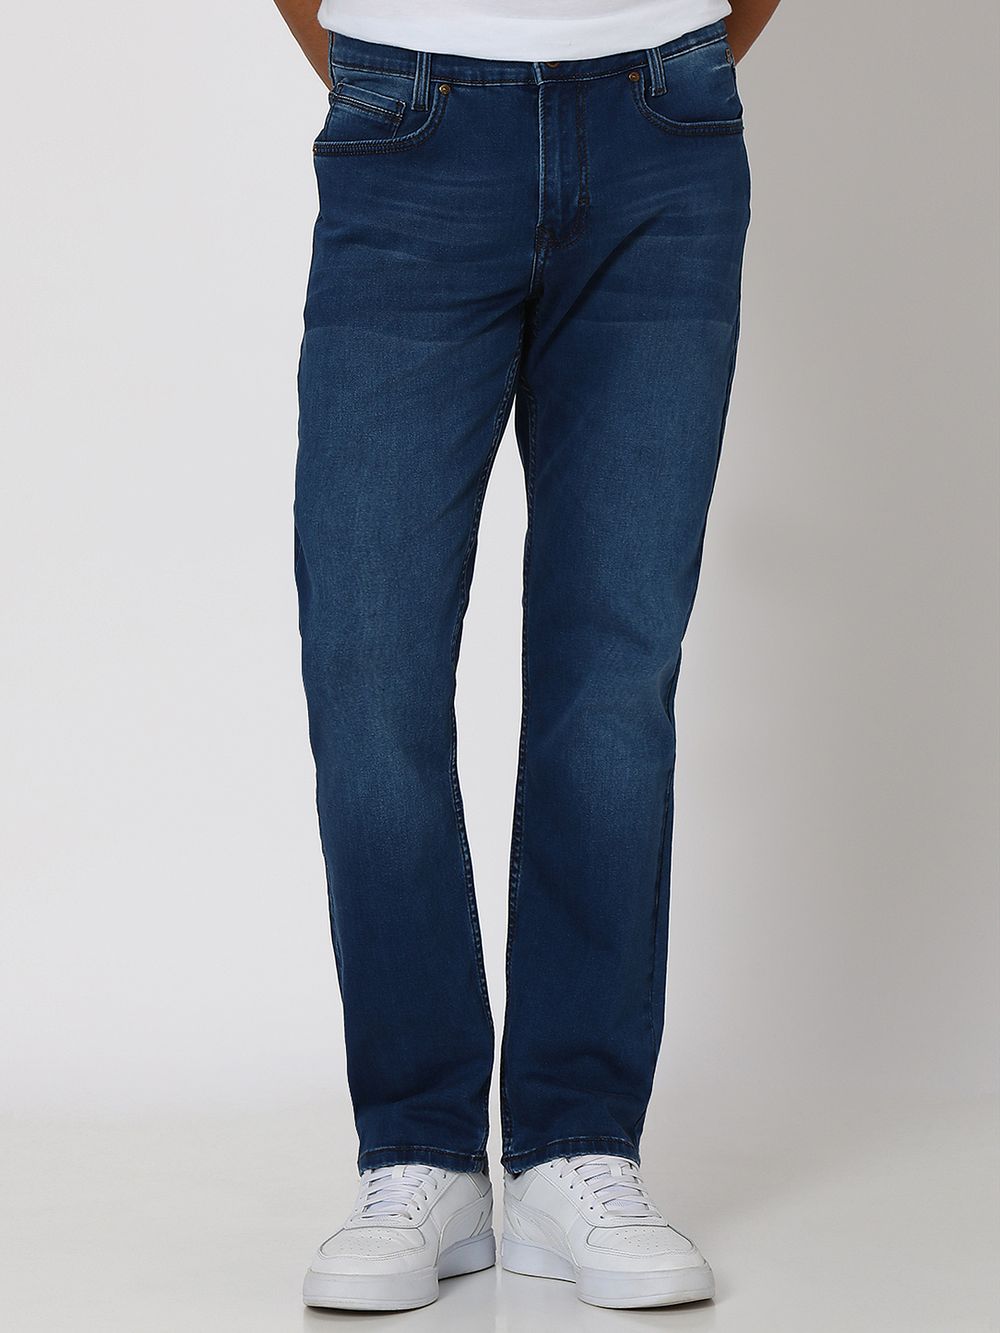 Blue Black Relaxed Straight Fit Originals Stretch Jeans